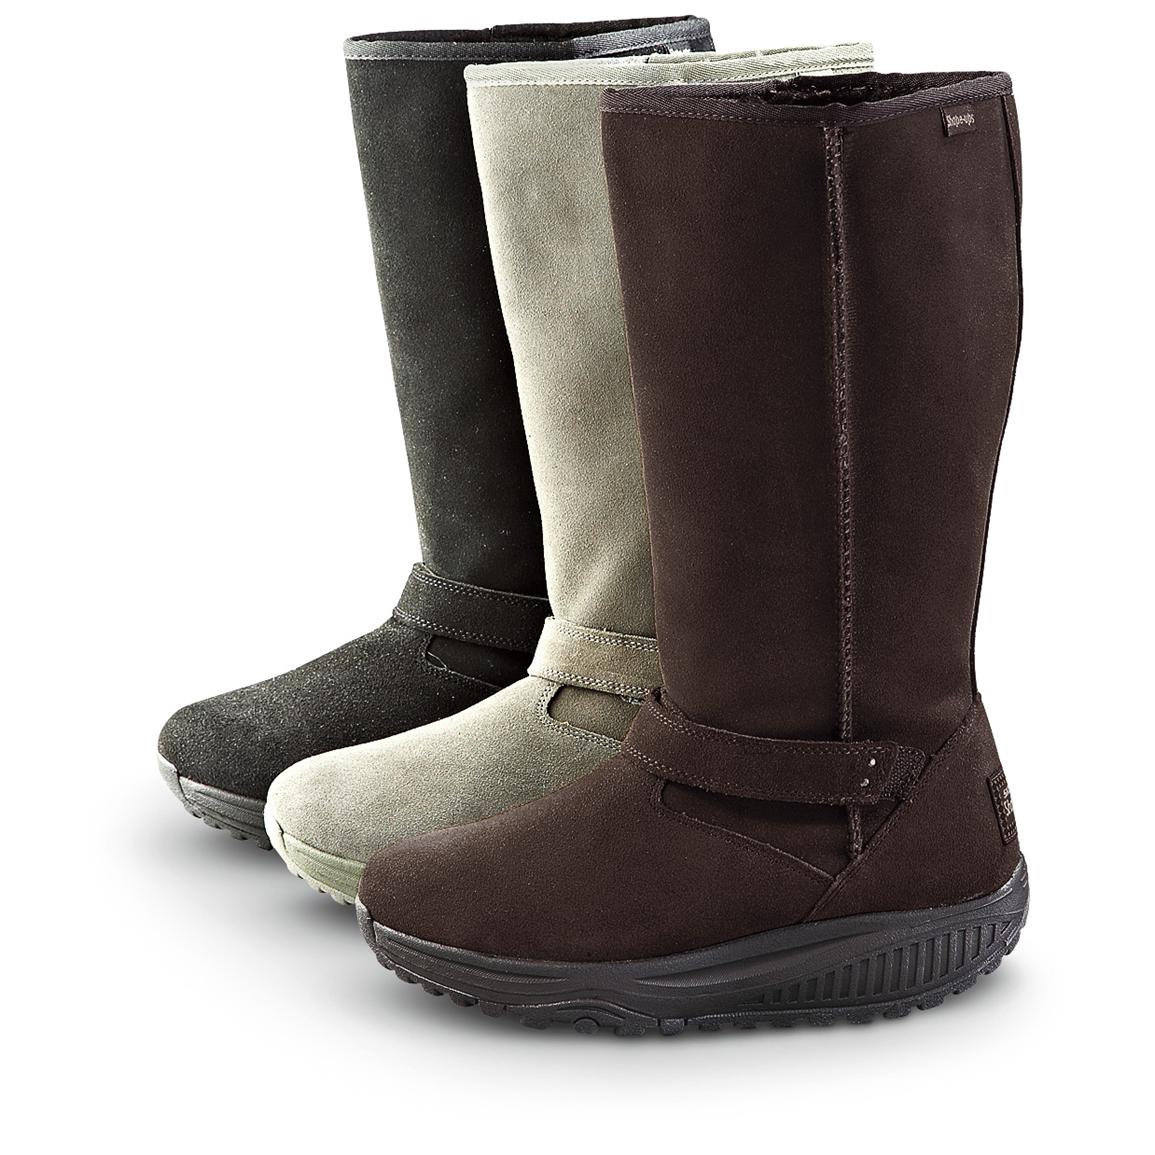 skechers fur lined boots womens Sale,up 